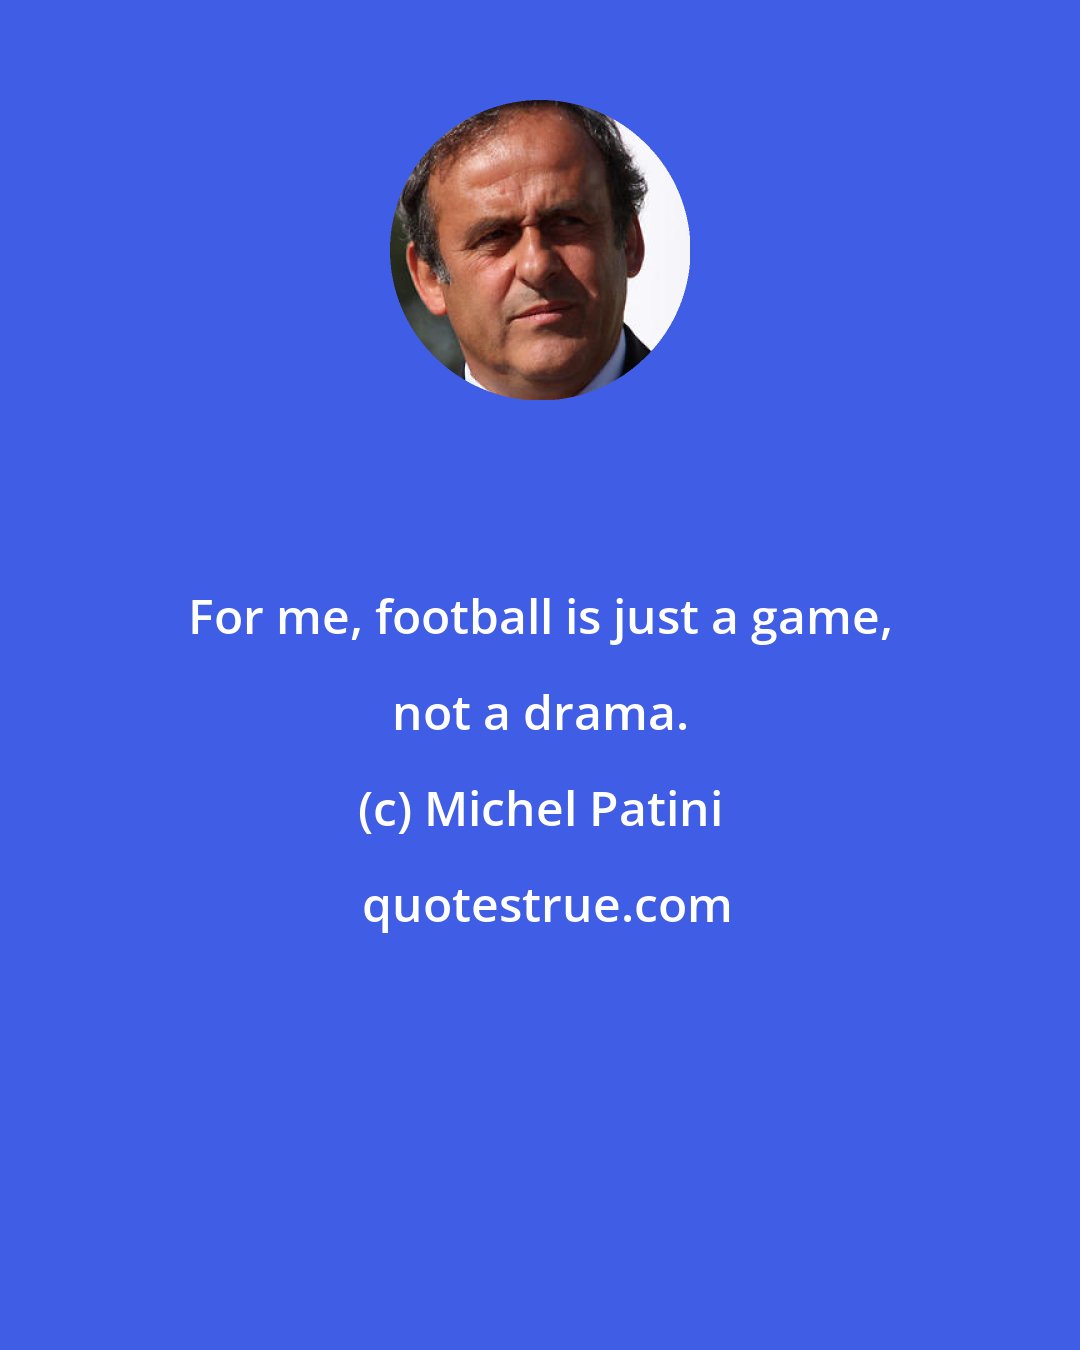 Michel Patini: For me, football is just a game, not a drama.